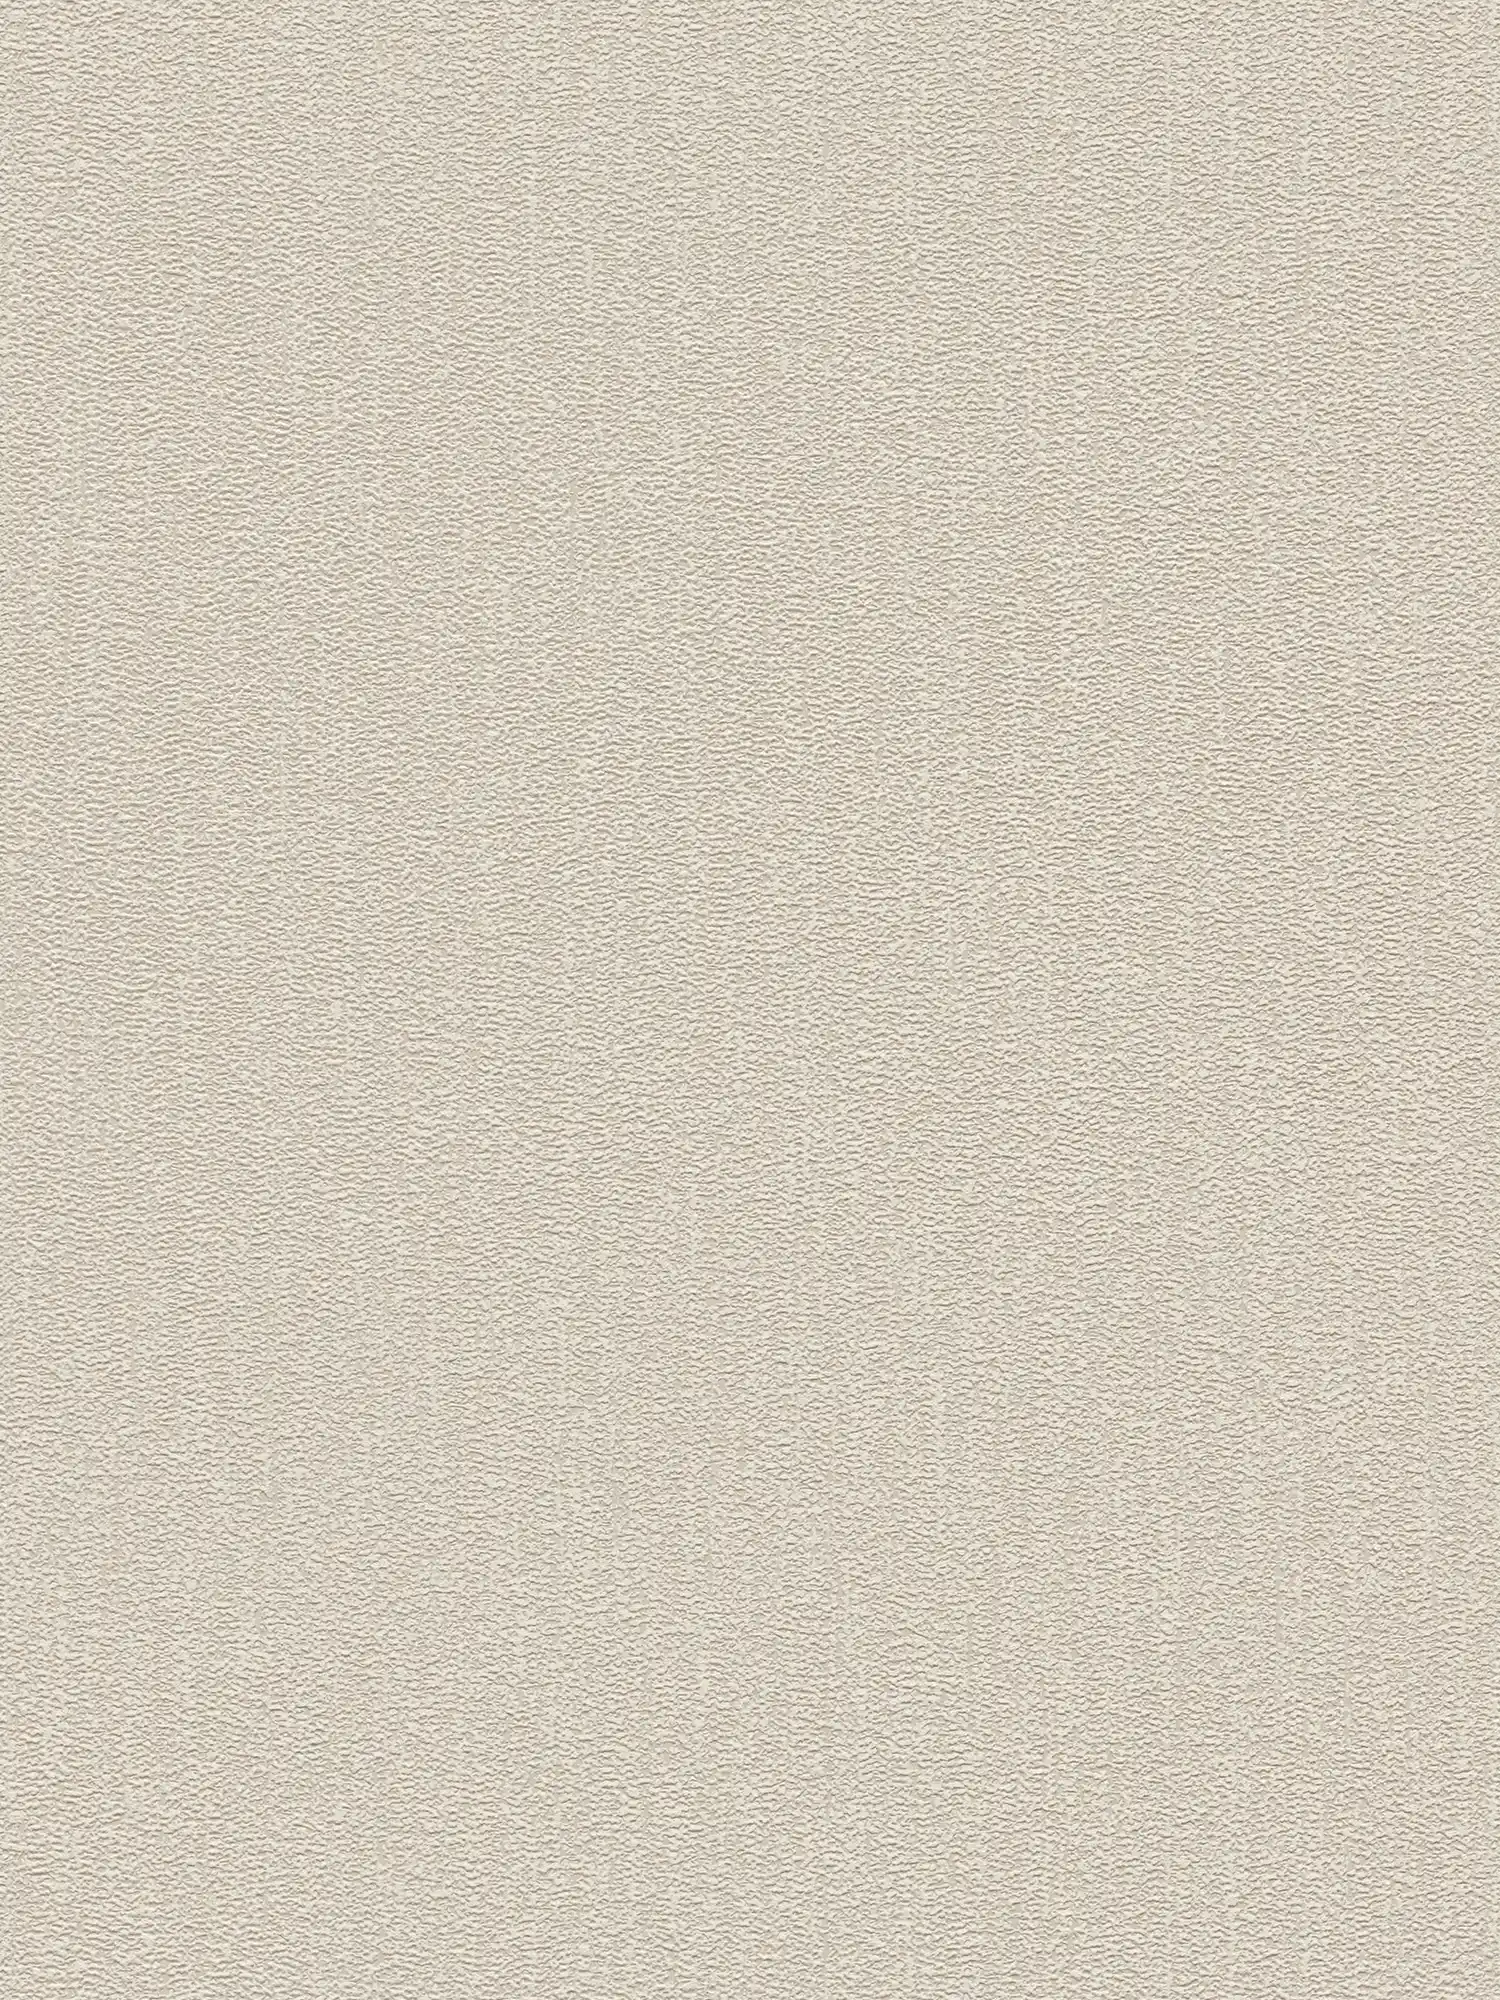 Plain wallpaper with structure with a slight sheen - beige, grey, silver
